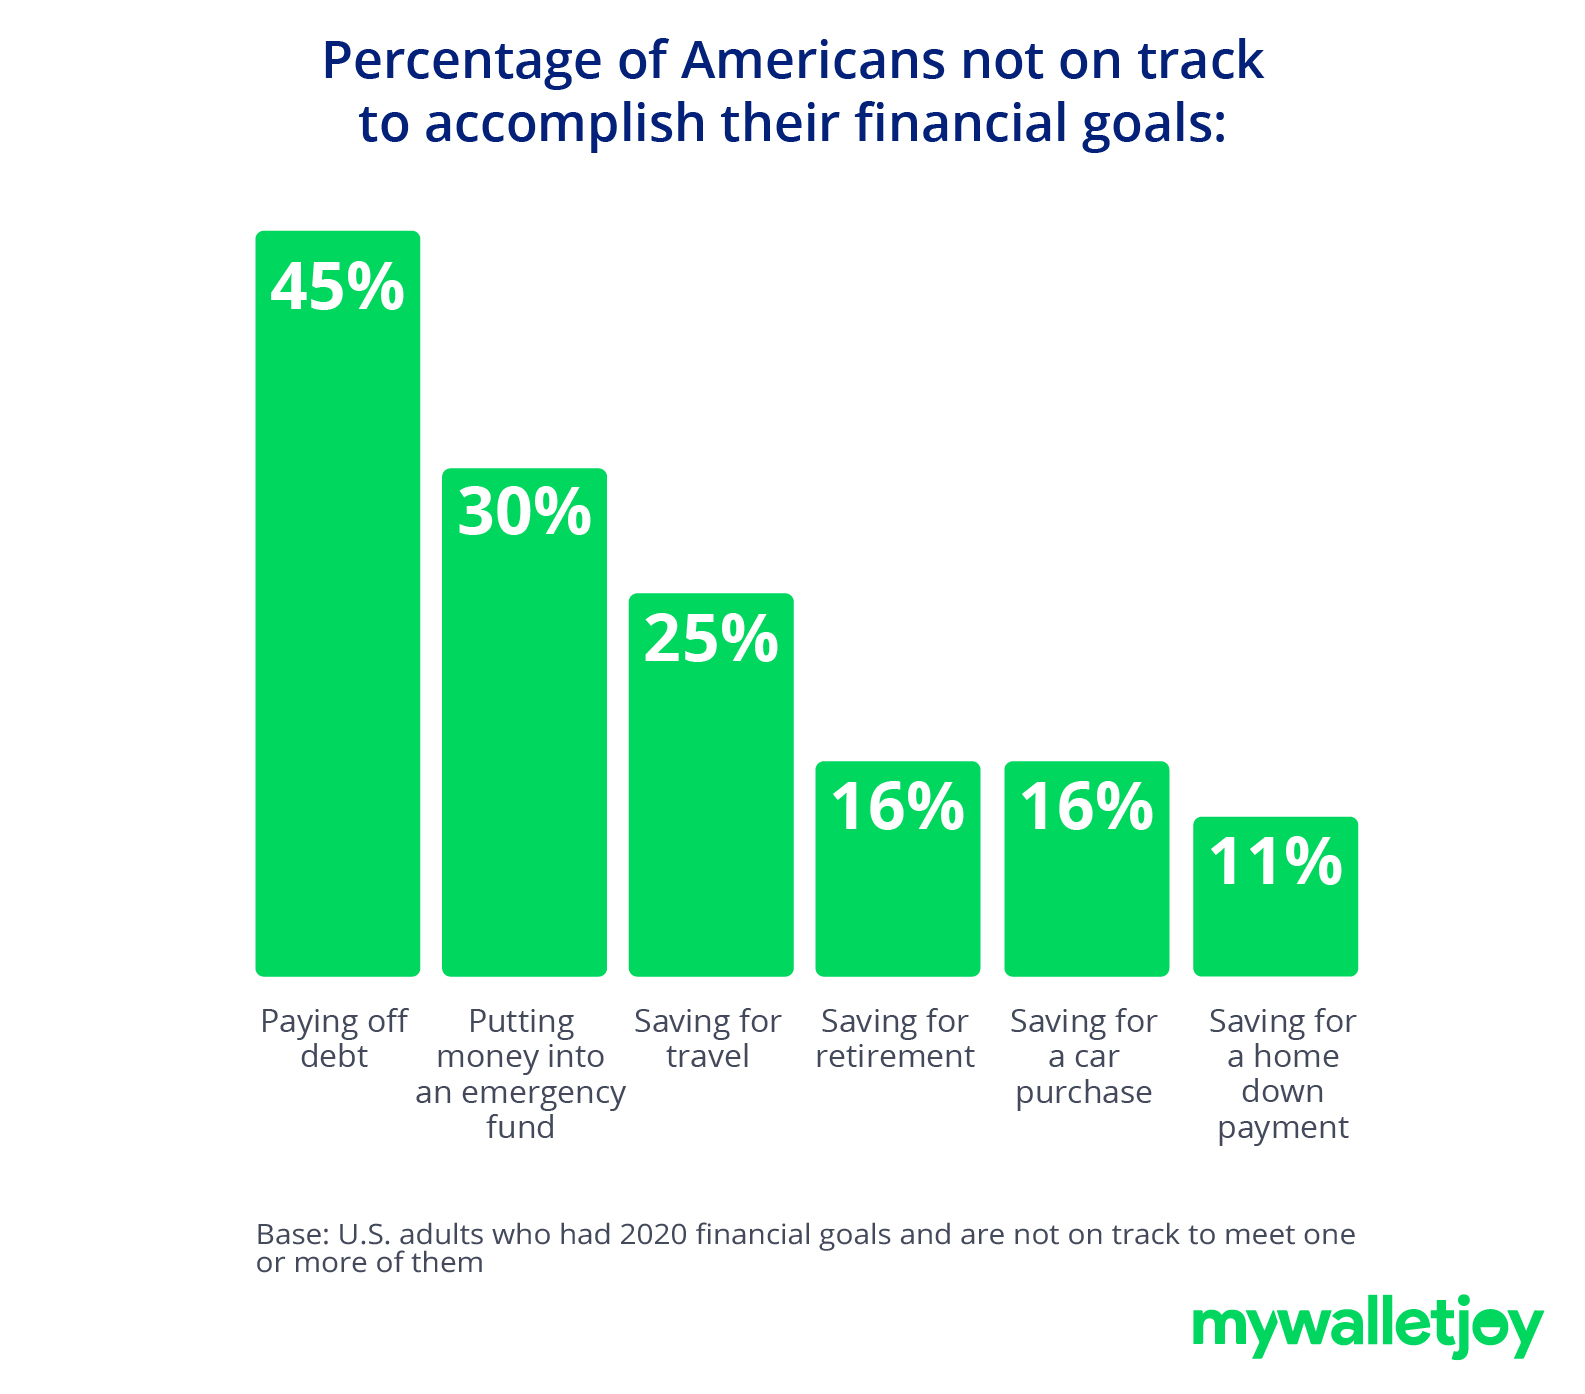 a visual representation of % of Americans who are not on track to accomplish their financial goals